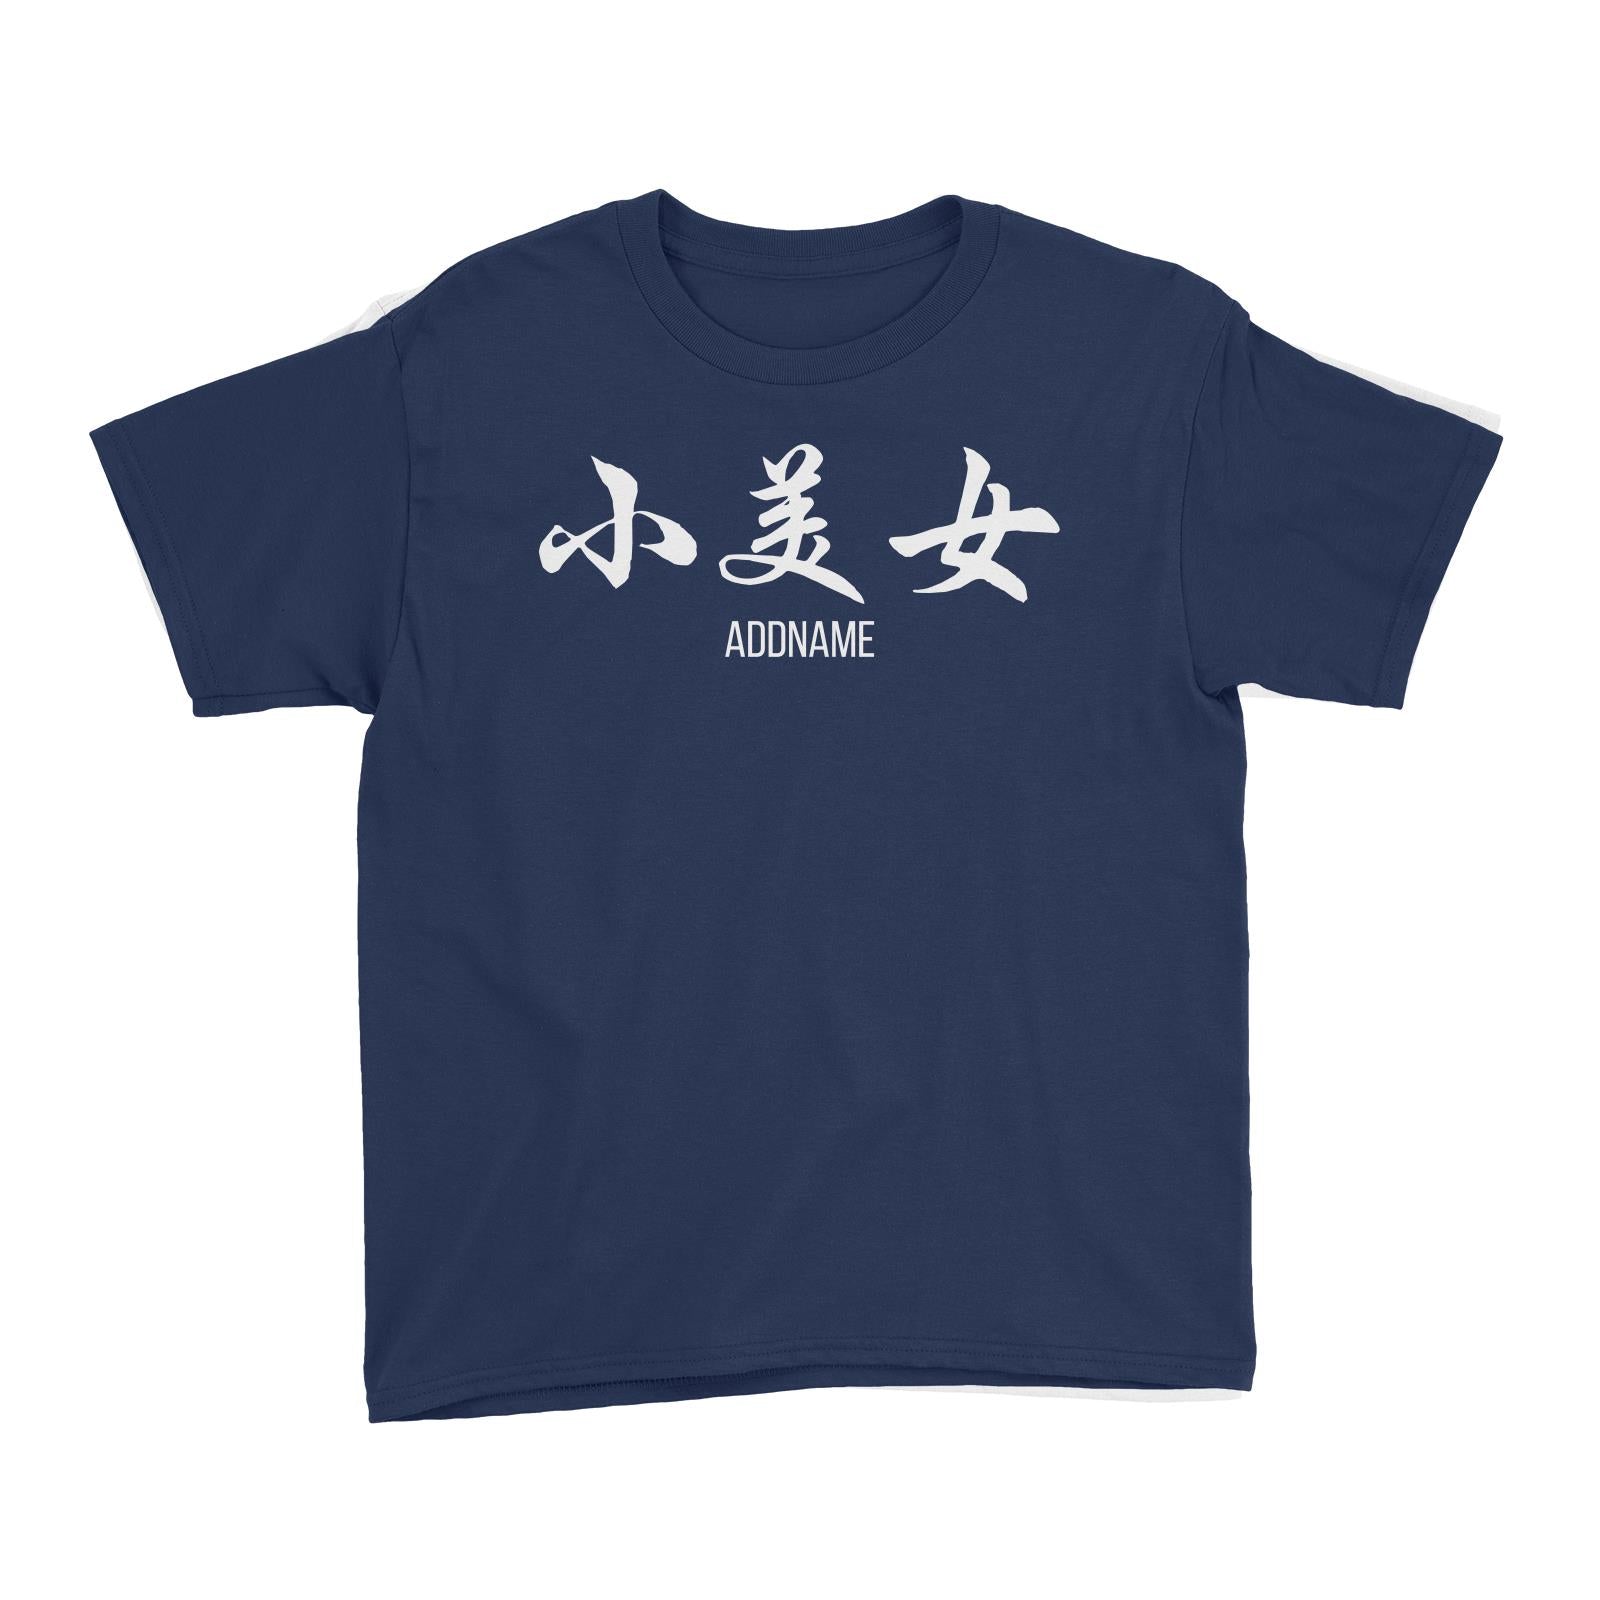 Small Pretty Lady in Chinese Calligraphy Kid's T-Shirt